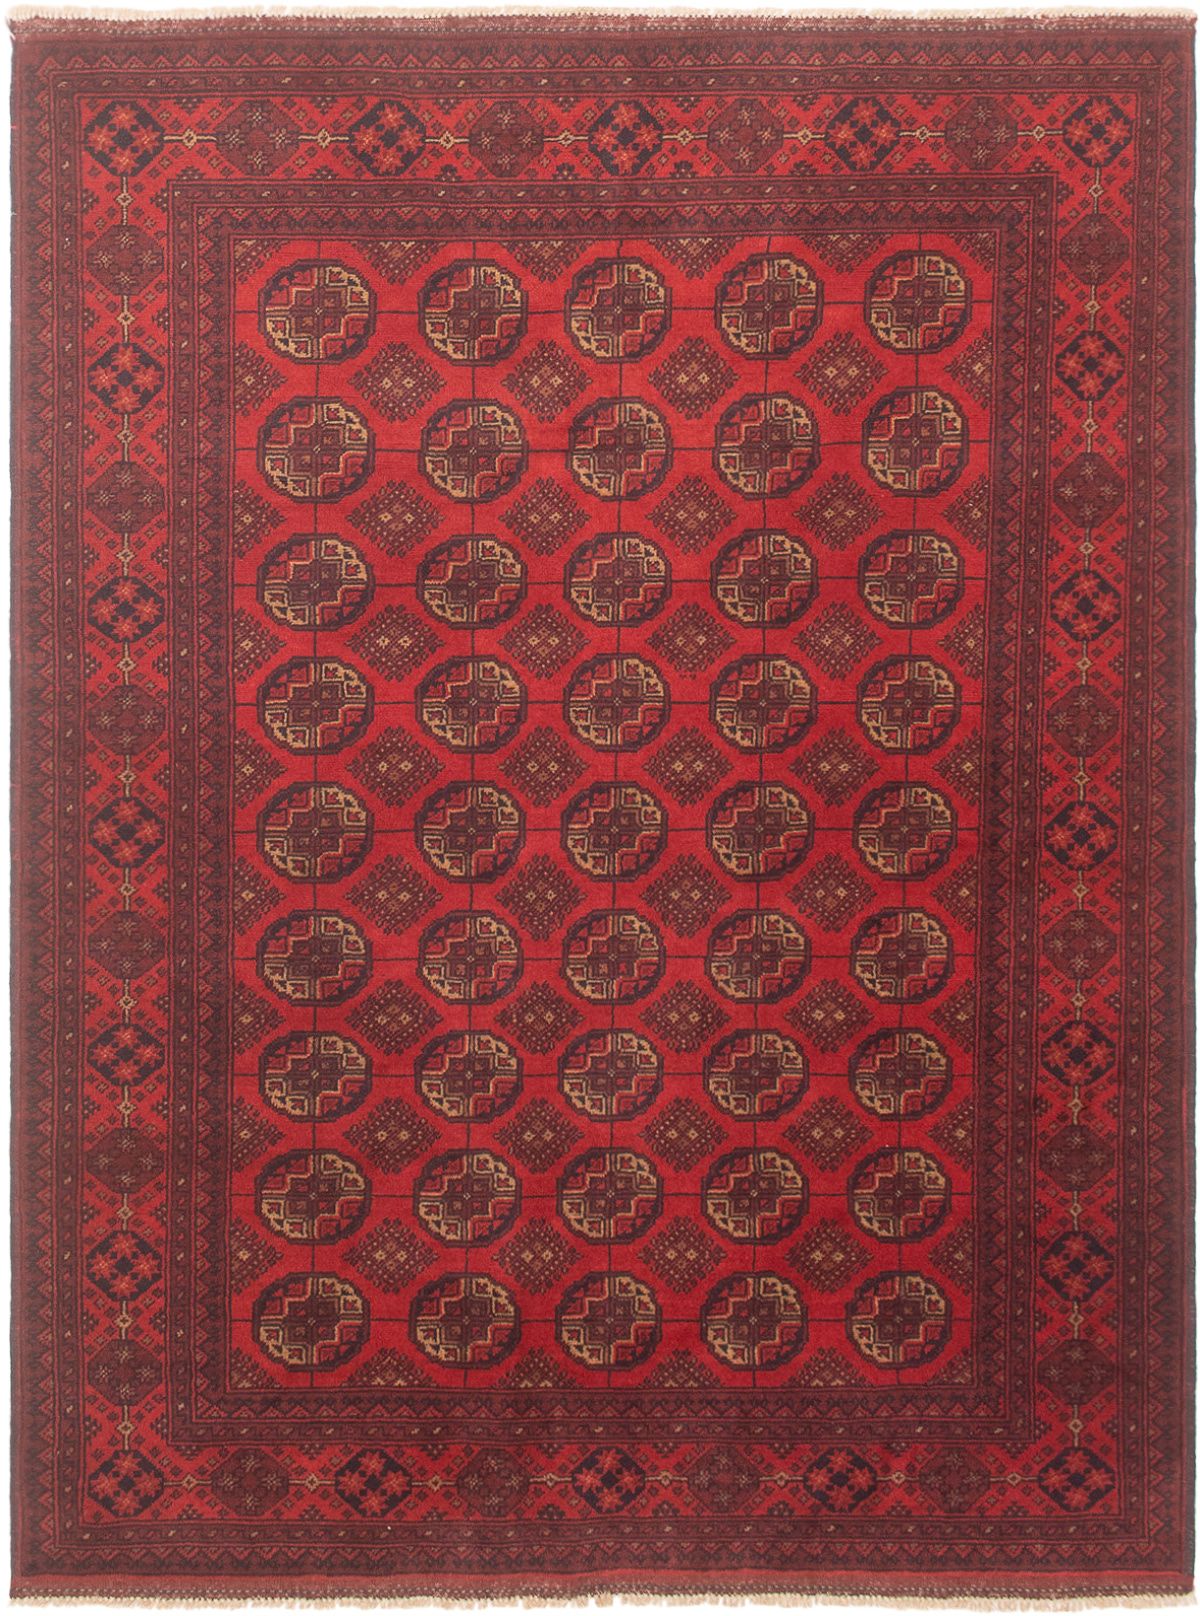 Hand-knotted Finest Khal Mohammadi Red Wool Rug 4'11" x 6'6" (23) Size: 4'11" x 6'6"  